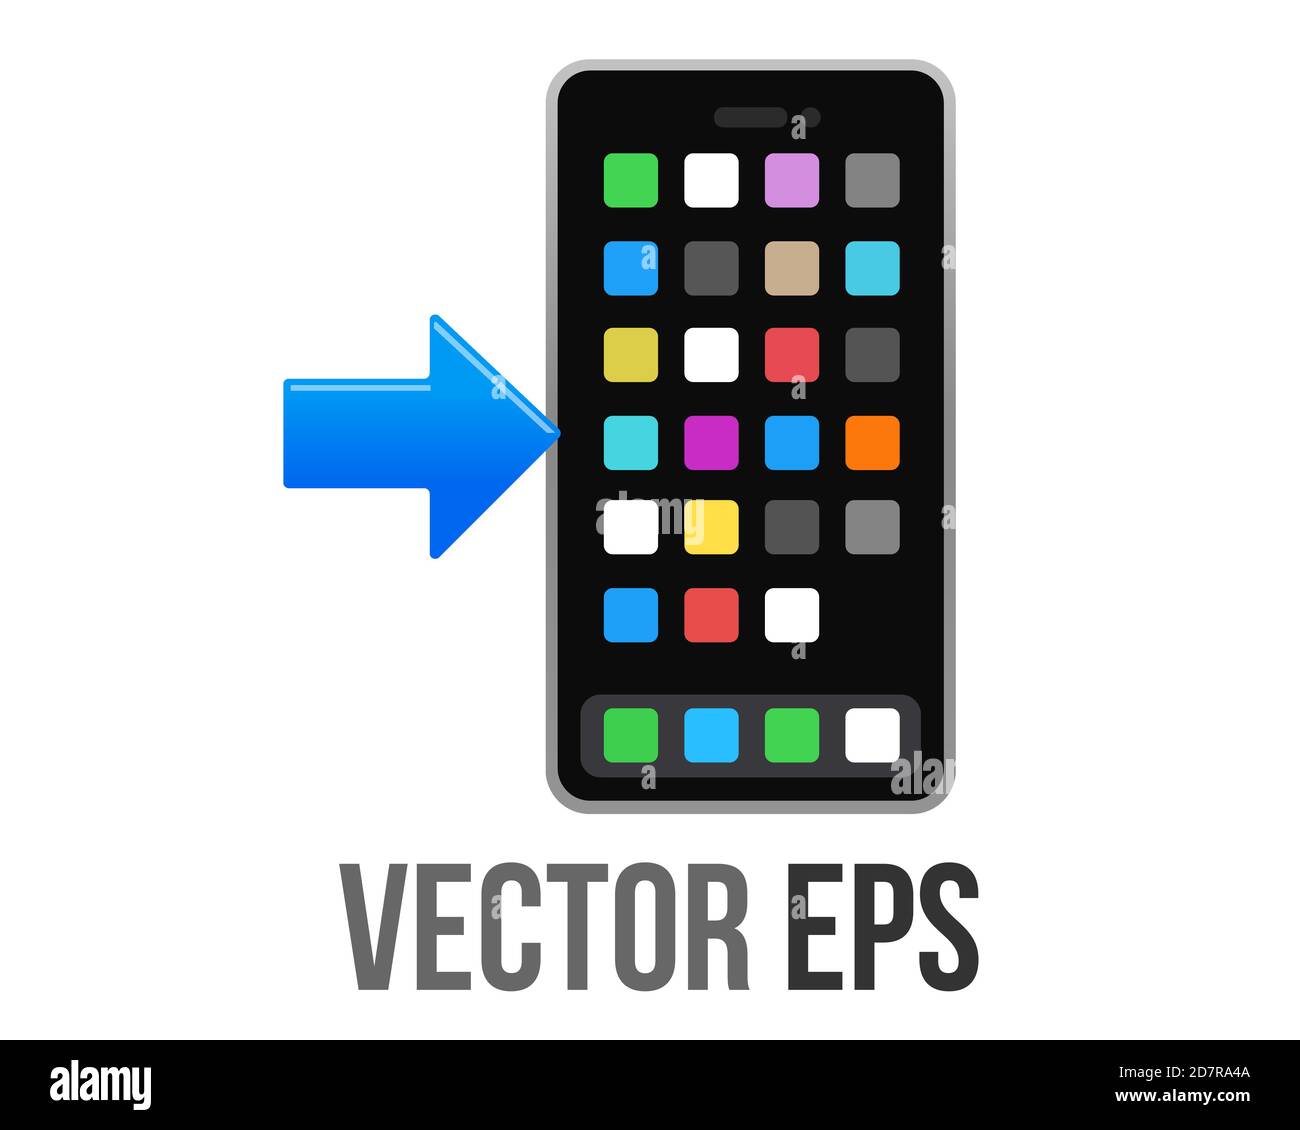 The isolated vector mobile phone icon with rightward arrow pointed at it from left, intended incoming call or message Stock Vector